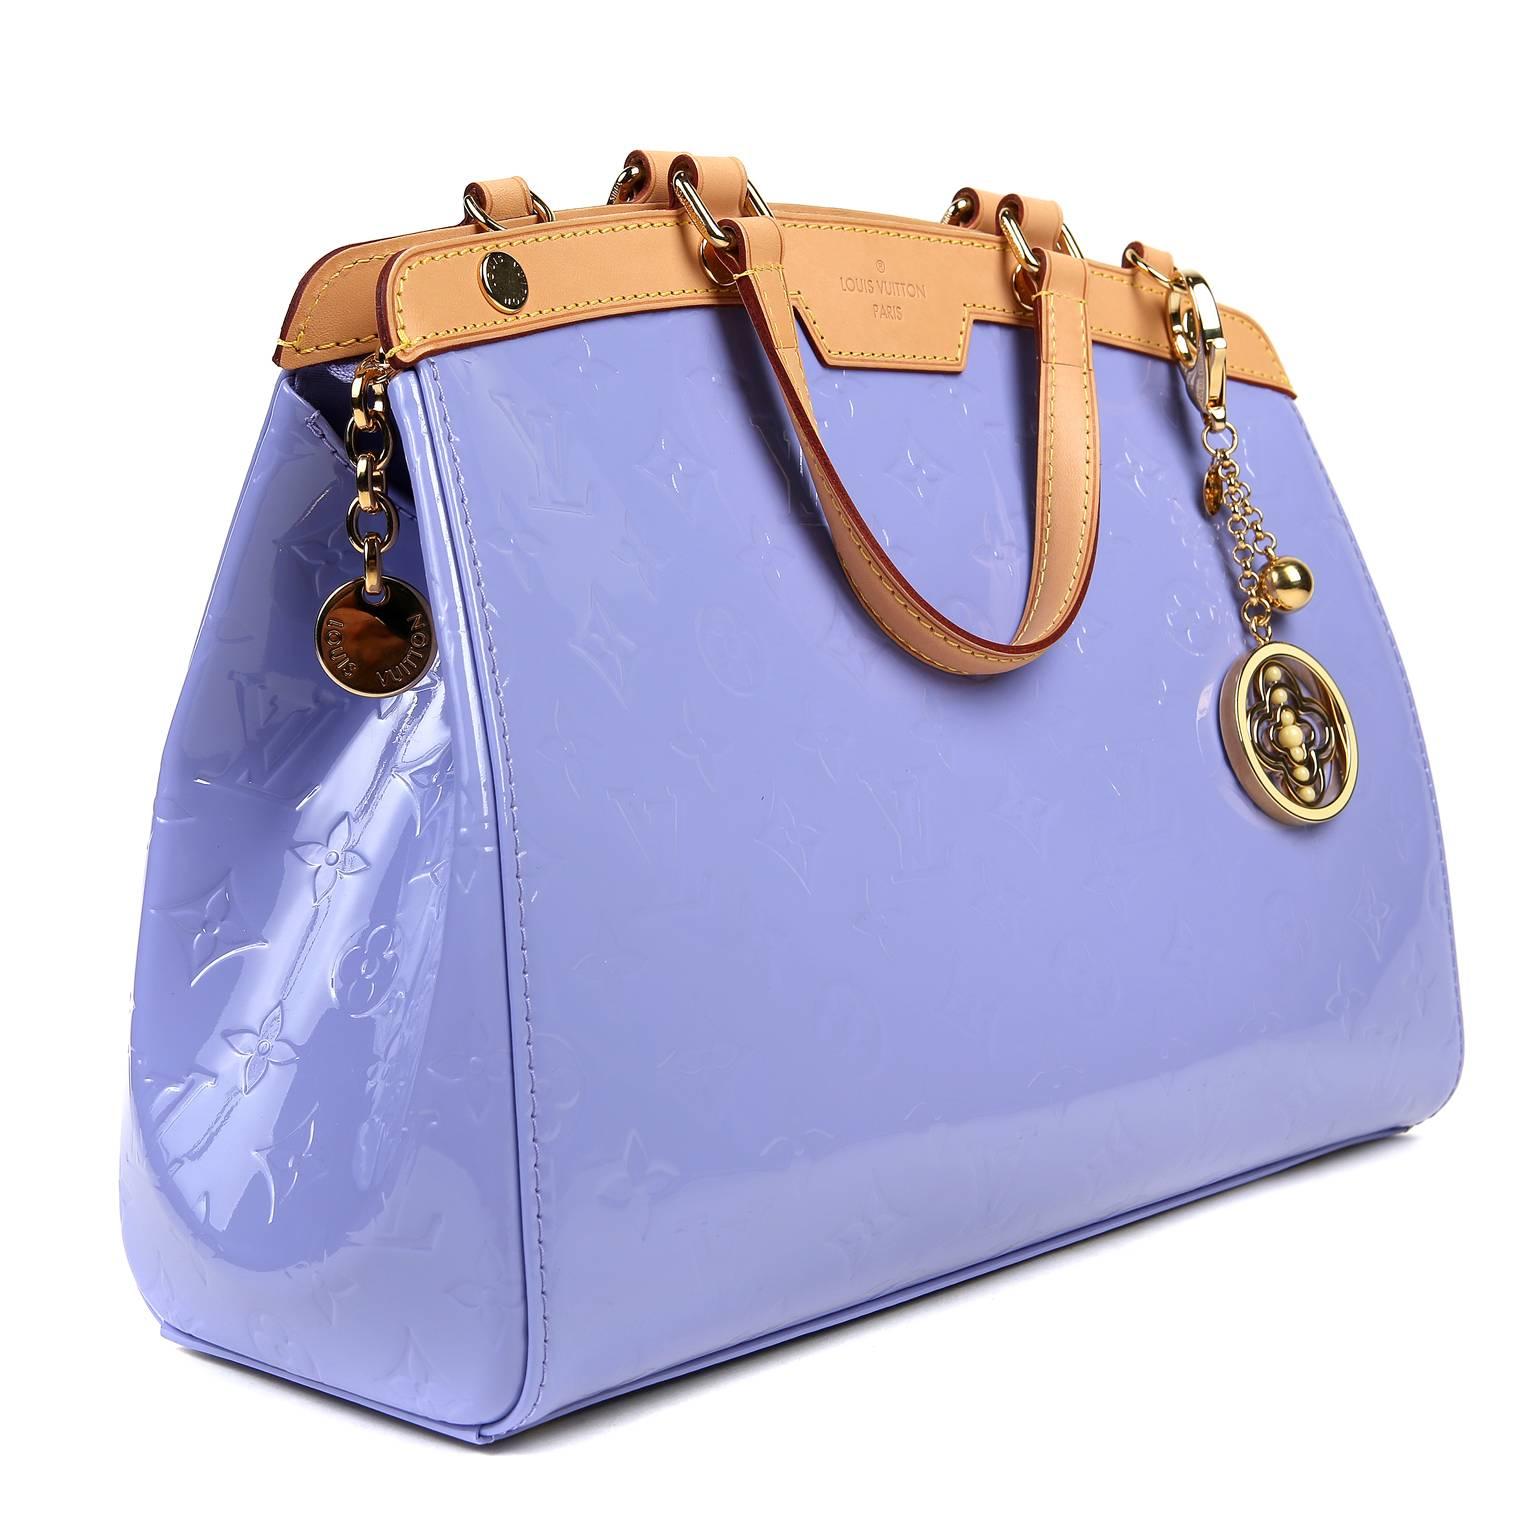 Louis Vuitton Lavender Vernis Leather Brea MM -PRISTINE; appears never before carried.  The classic silhouette is perfectly scaled for every day enjoyment. 
Lavender monogram Vernis leather satchel is trimmed with natural cowhide.  Zipper top